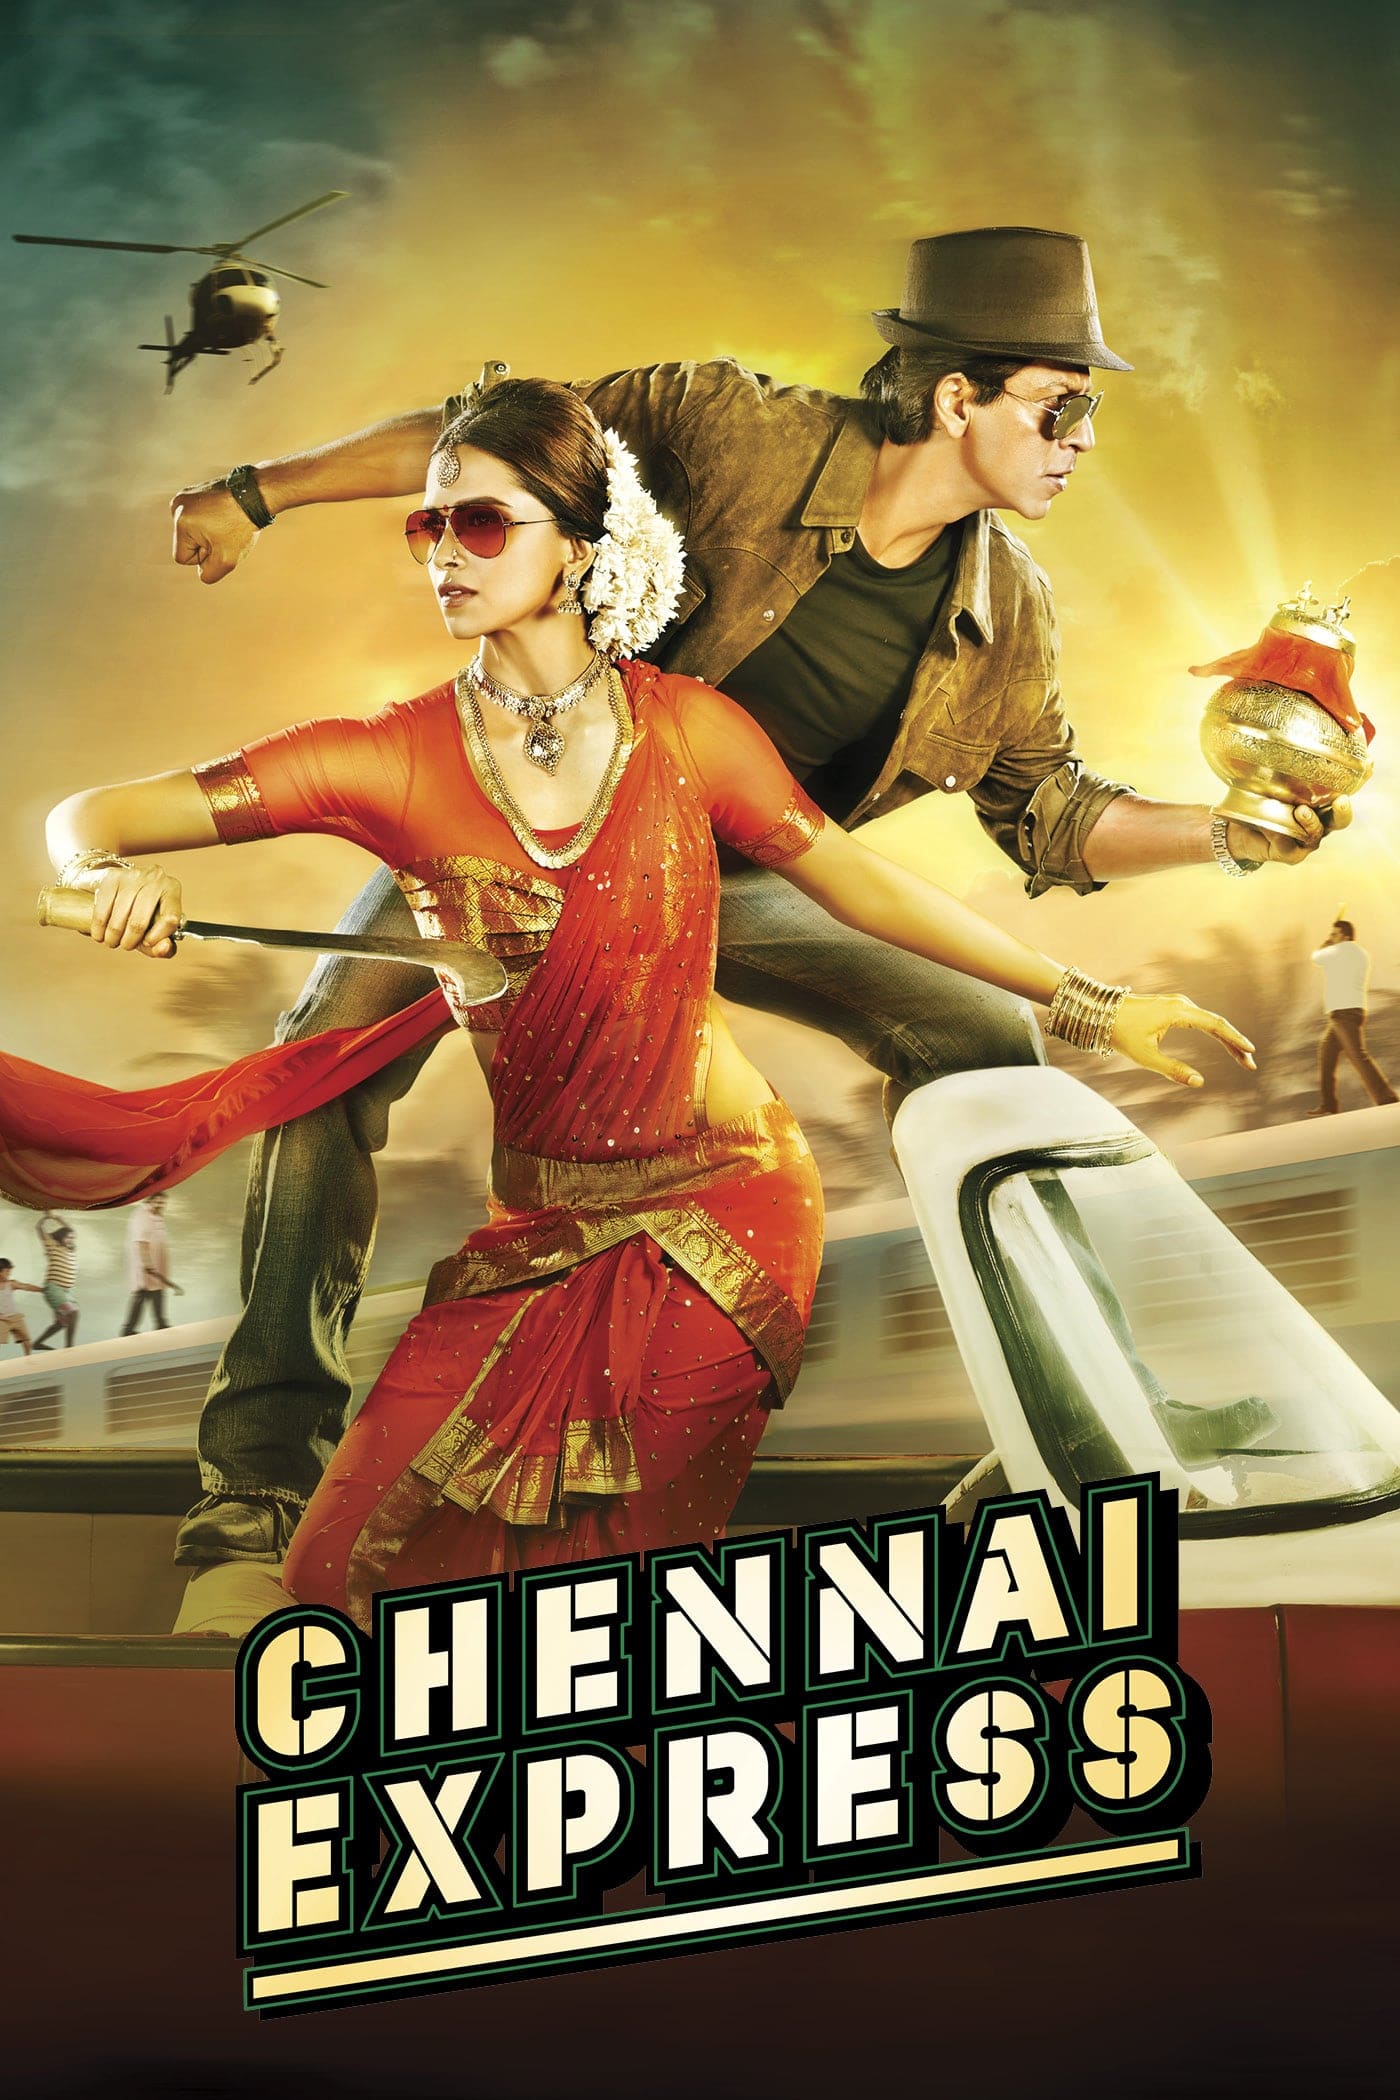 Poster for the movie "Chennai Express"